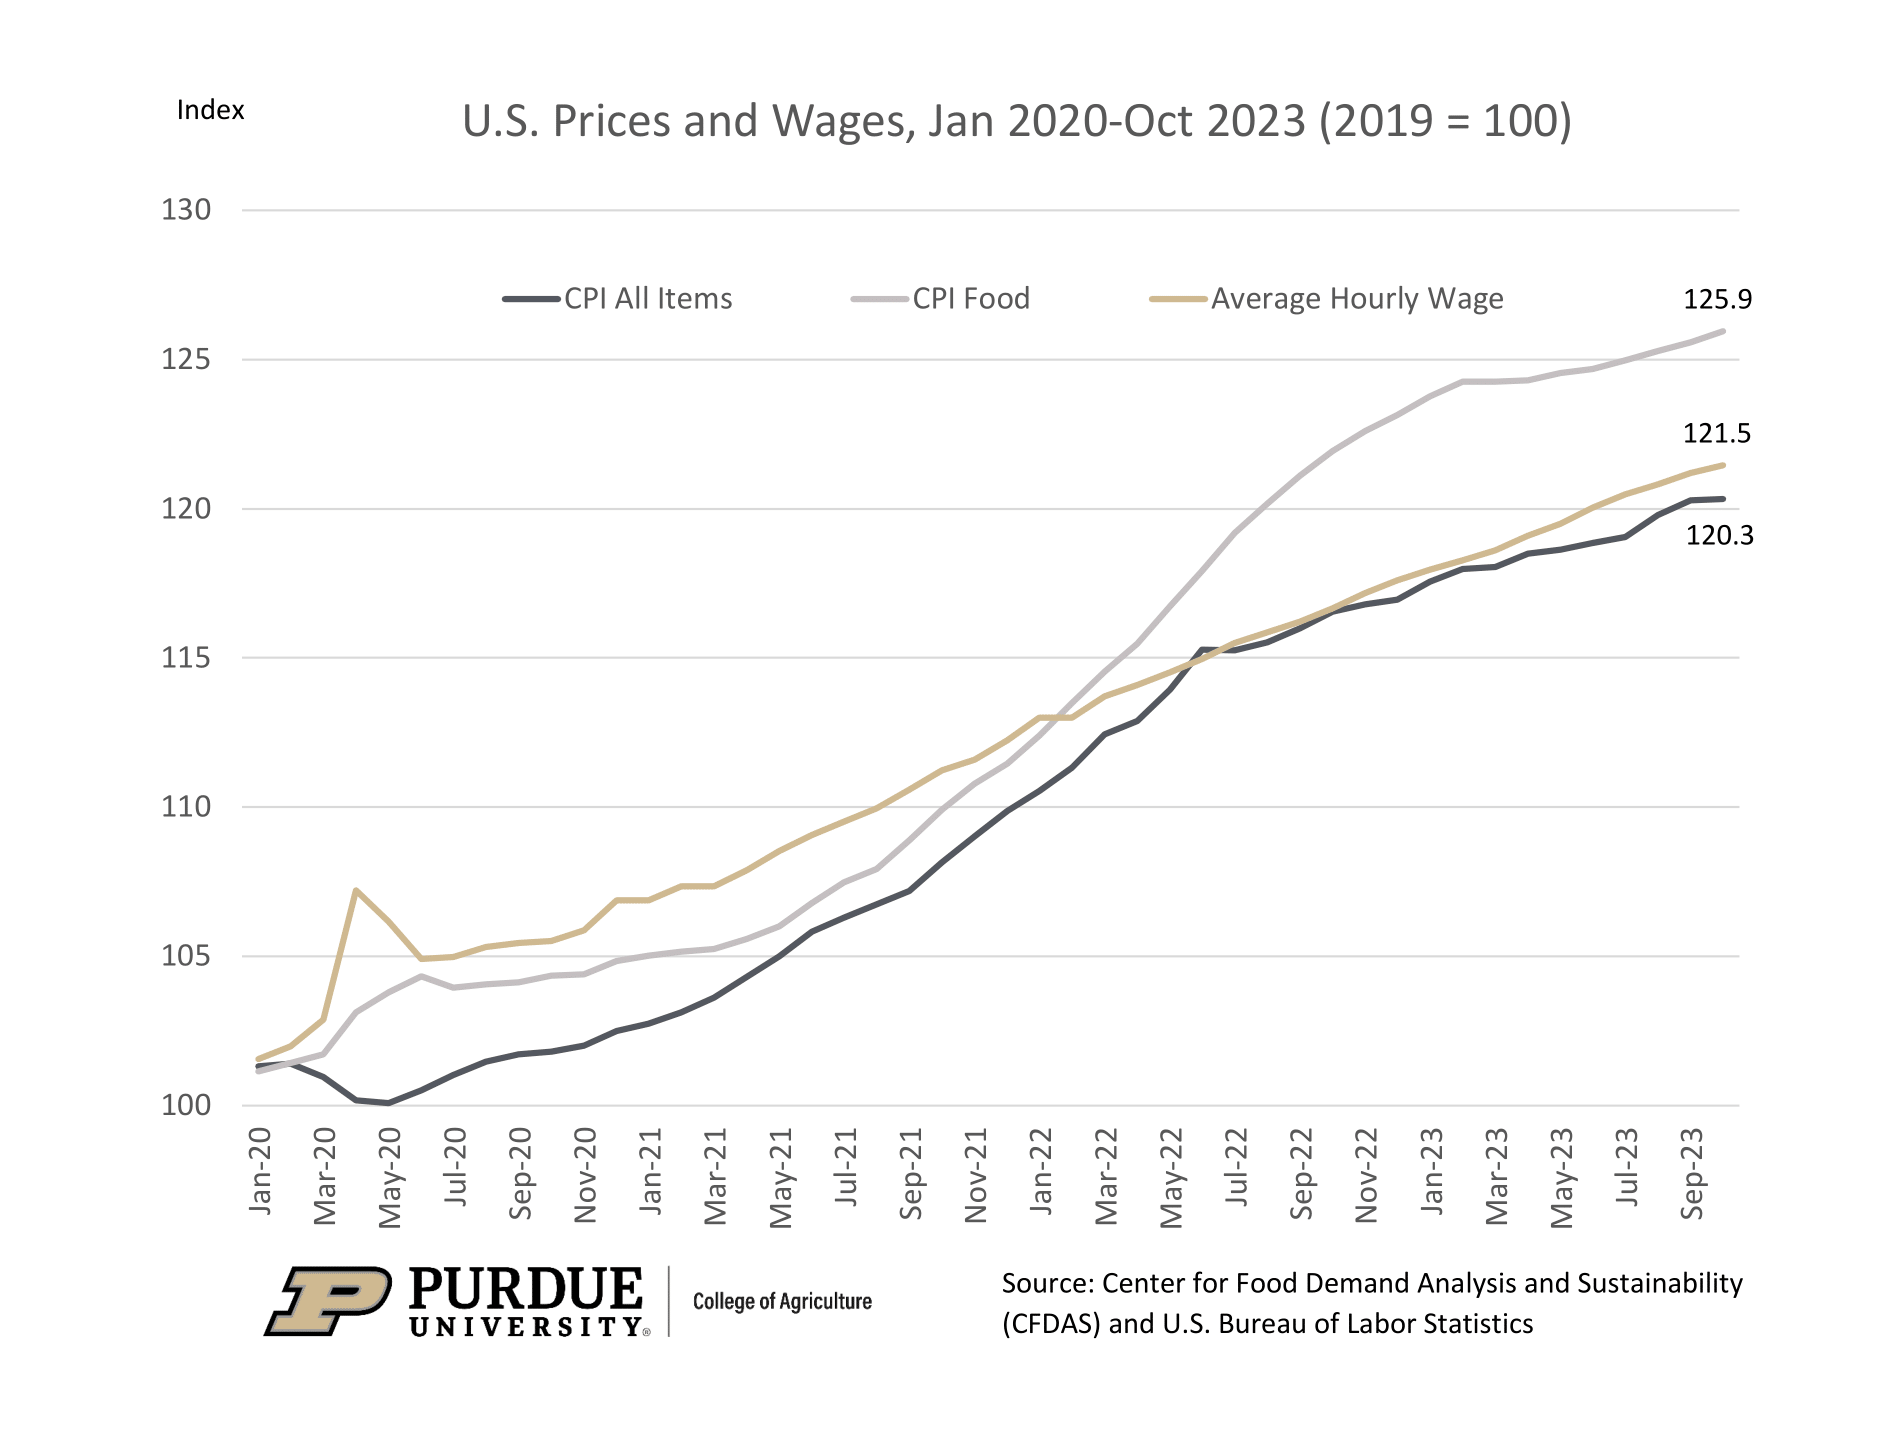 Figure 1. Index of U.S. Prices and Wages from January 2020 to October 2023